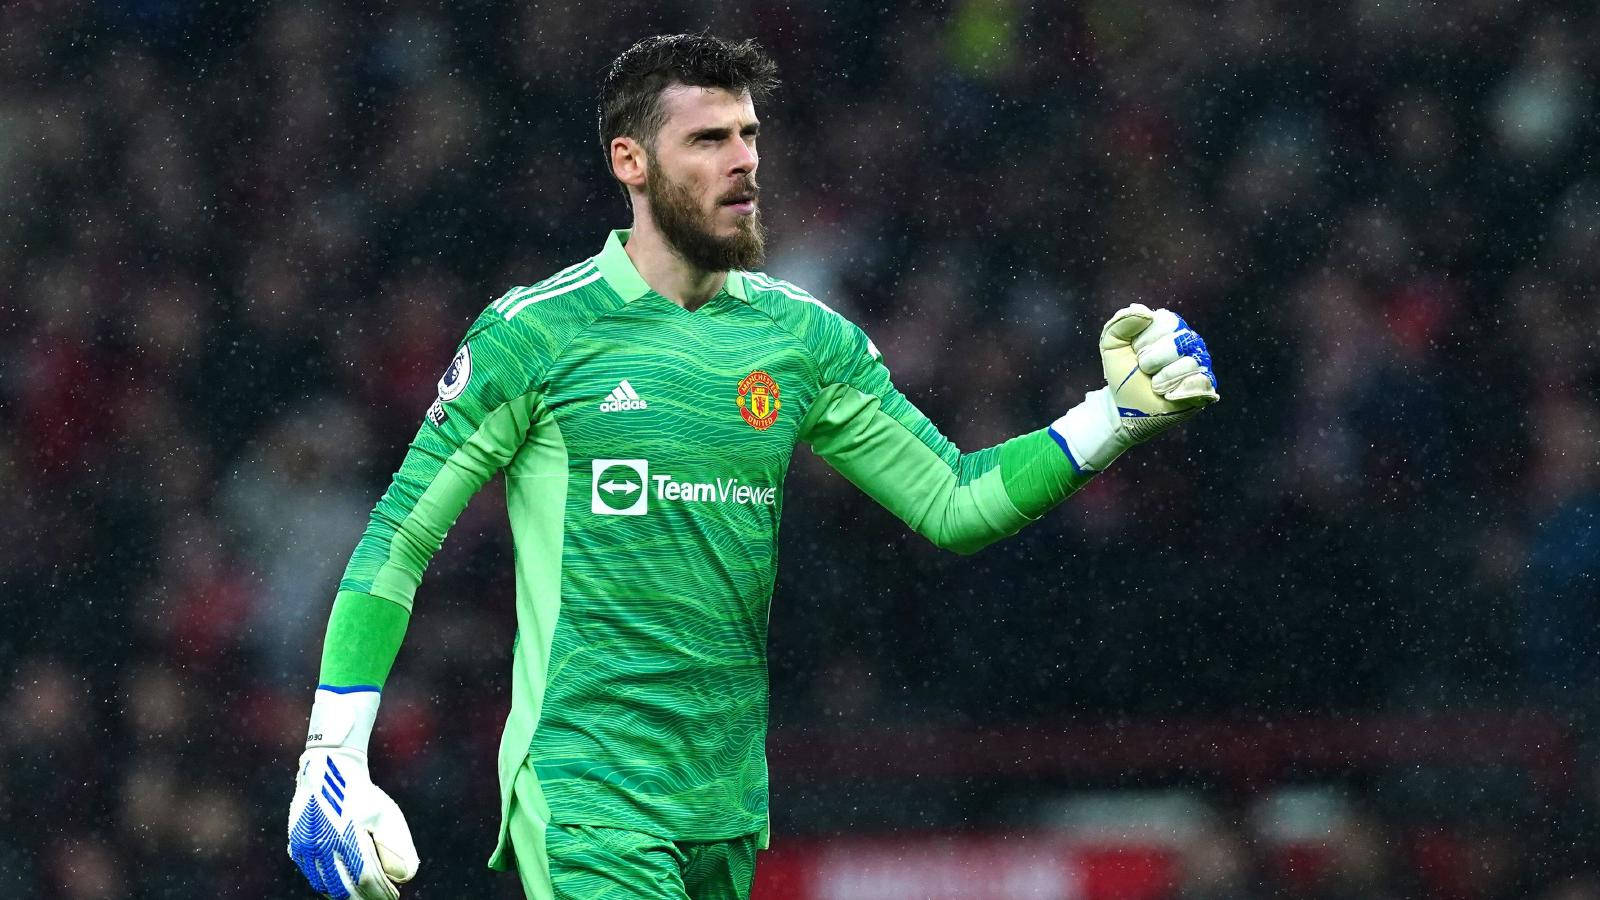 Davidde Geas Knutna Näve (for A Computer Or Mobile Wallpaper With A Picture Of David De Gea Clenching His Fist) Wallpaper